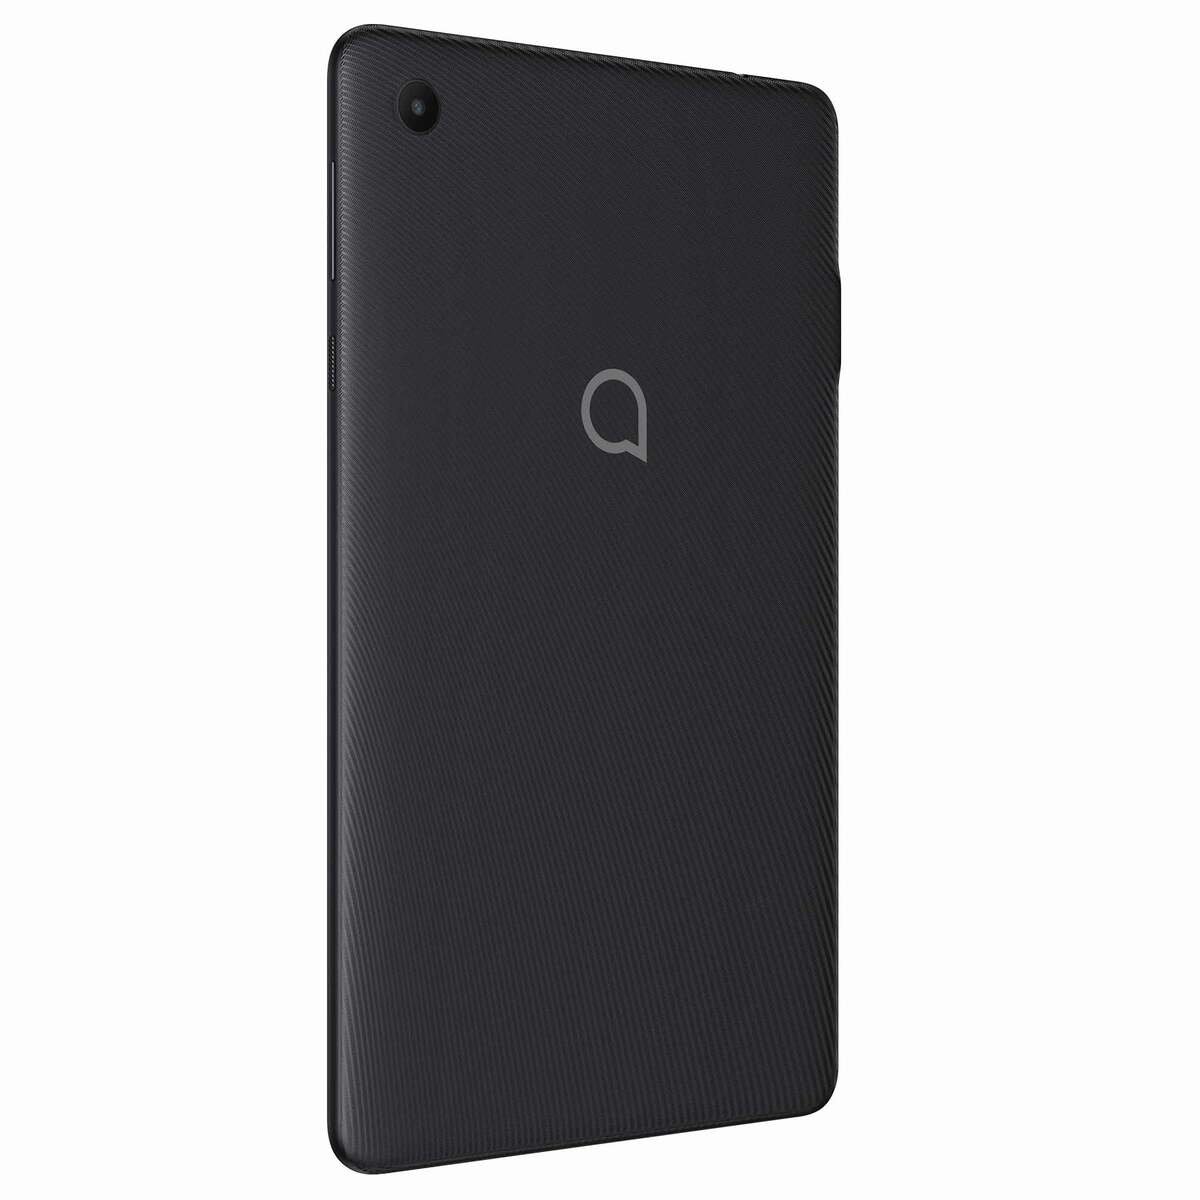 Alcatel Tablet 3T 8 9032X, 4G, Quad-core, 2GB RAM, 32GB Memory, 8 inches Display, Android, Black